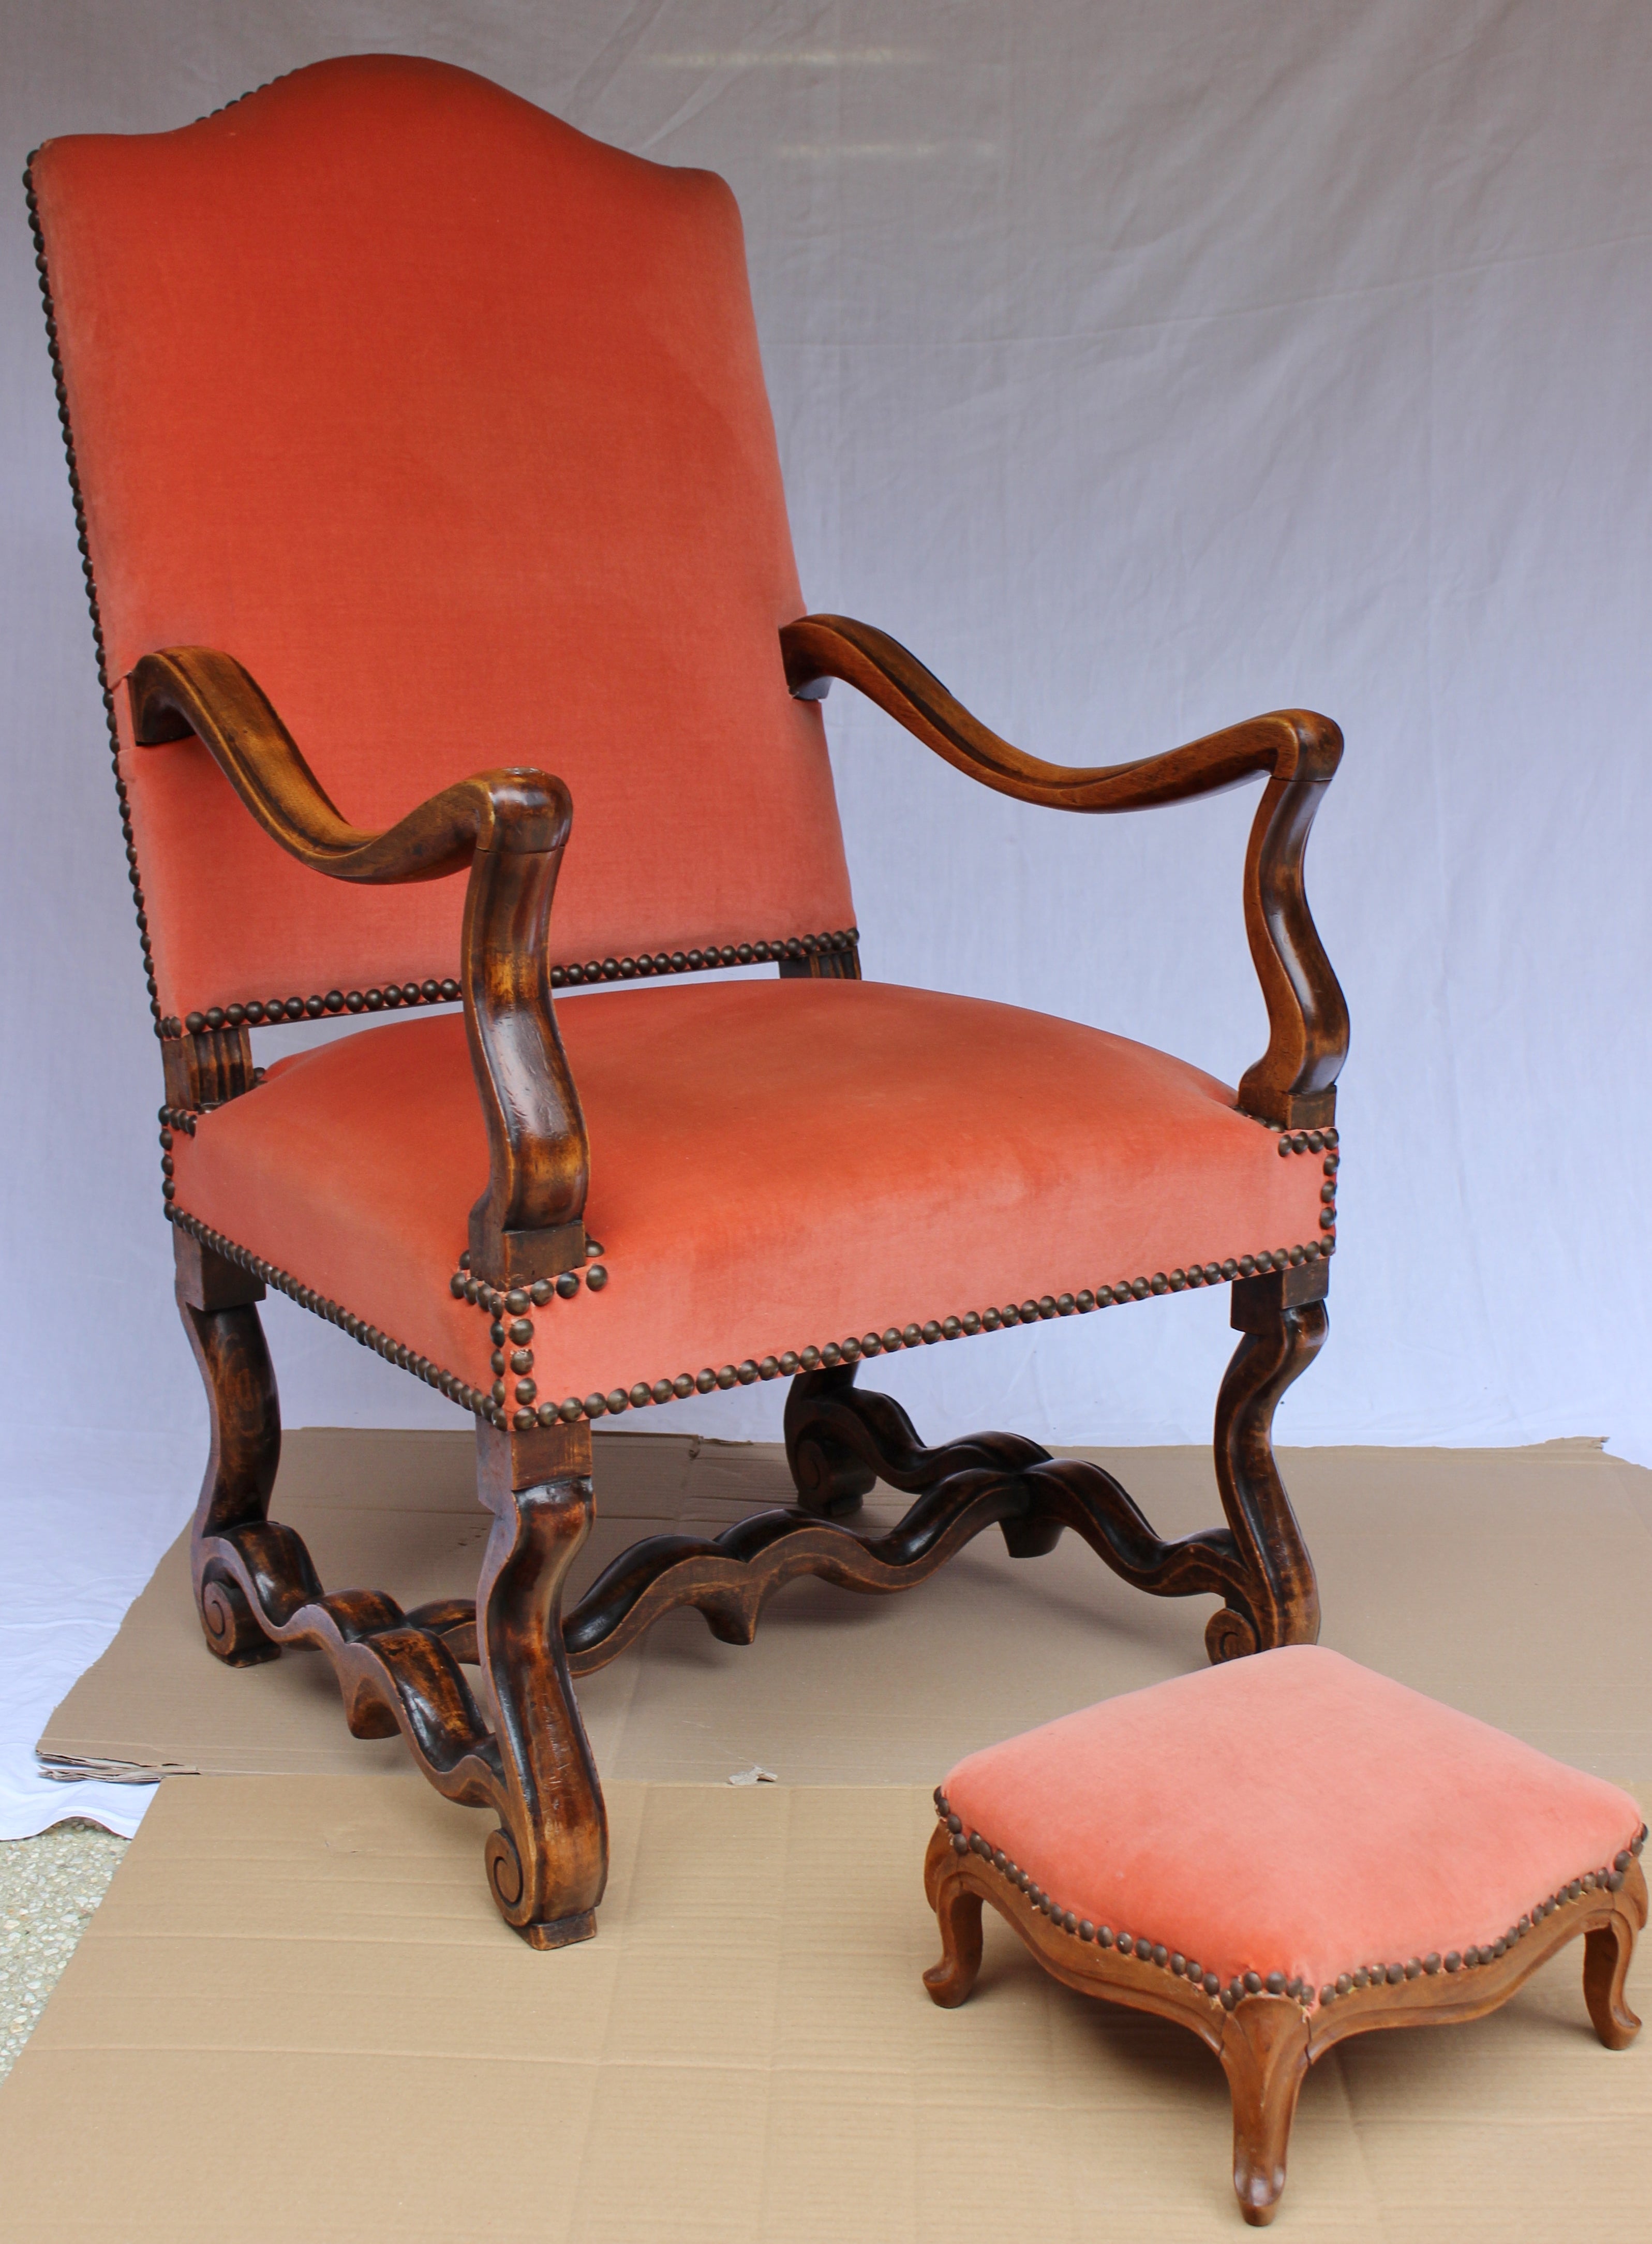 Louis XIV style Armchair with its footrest.